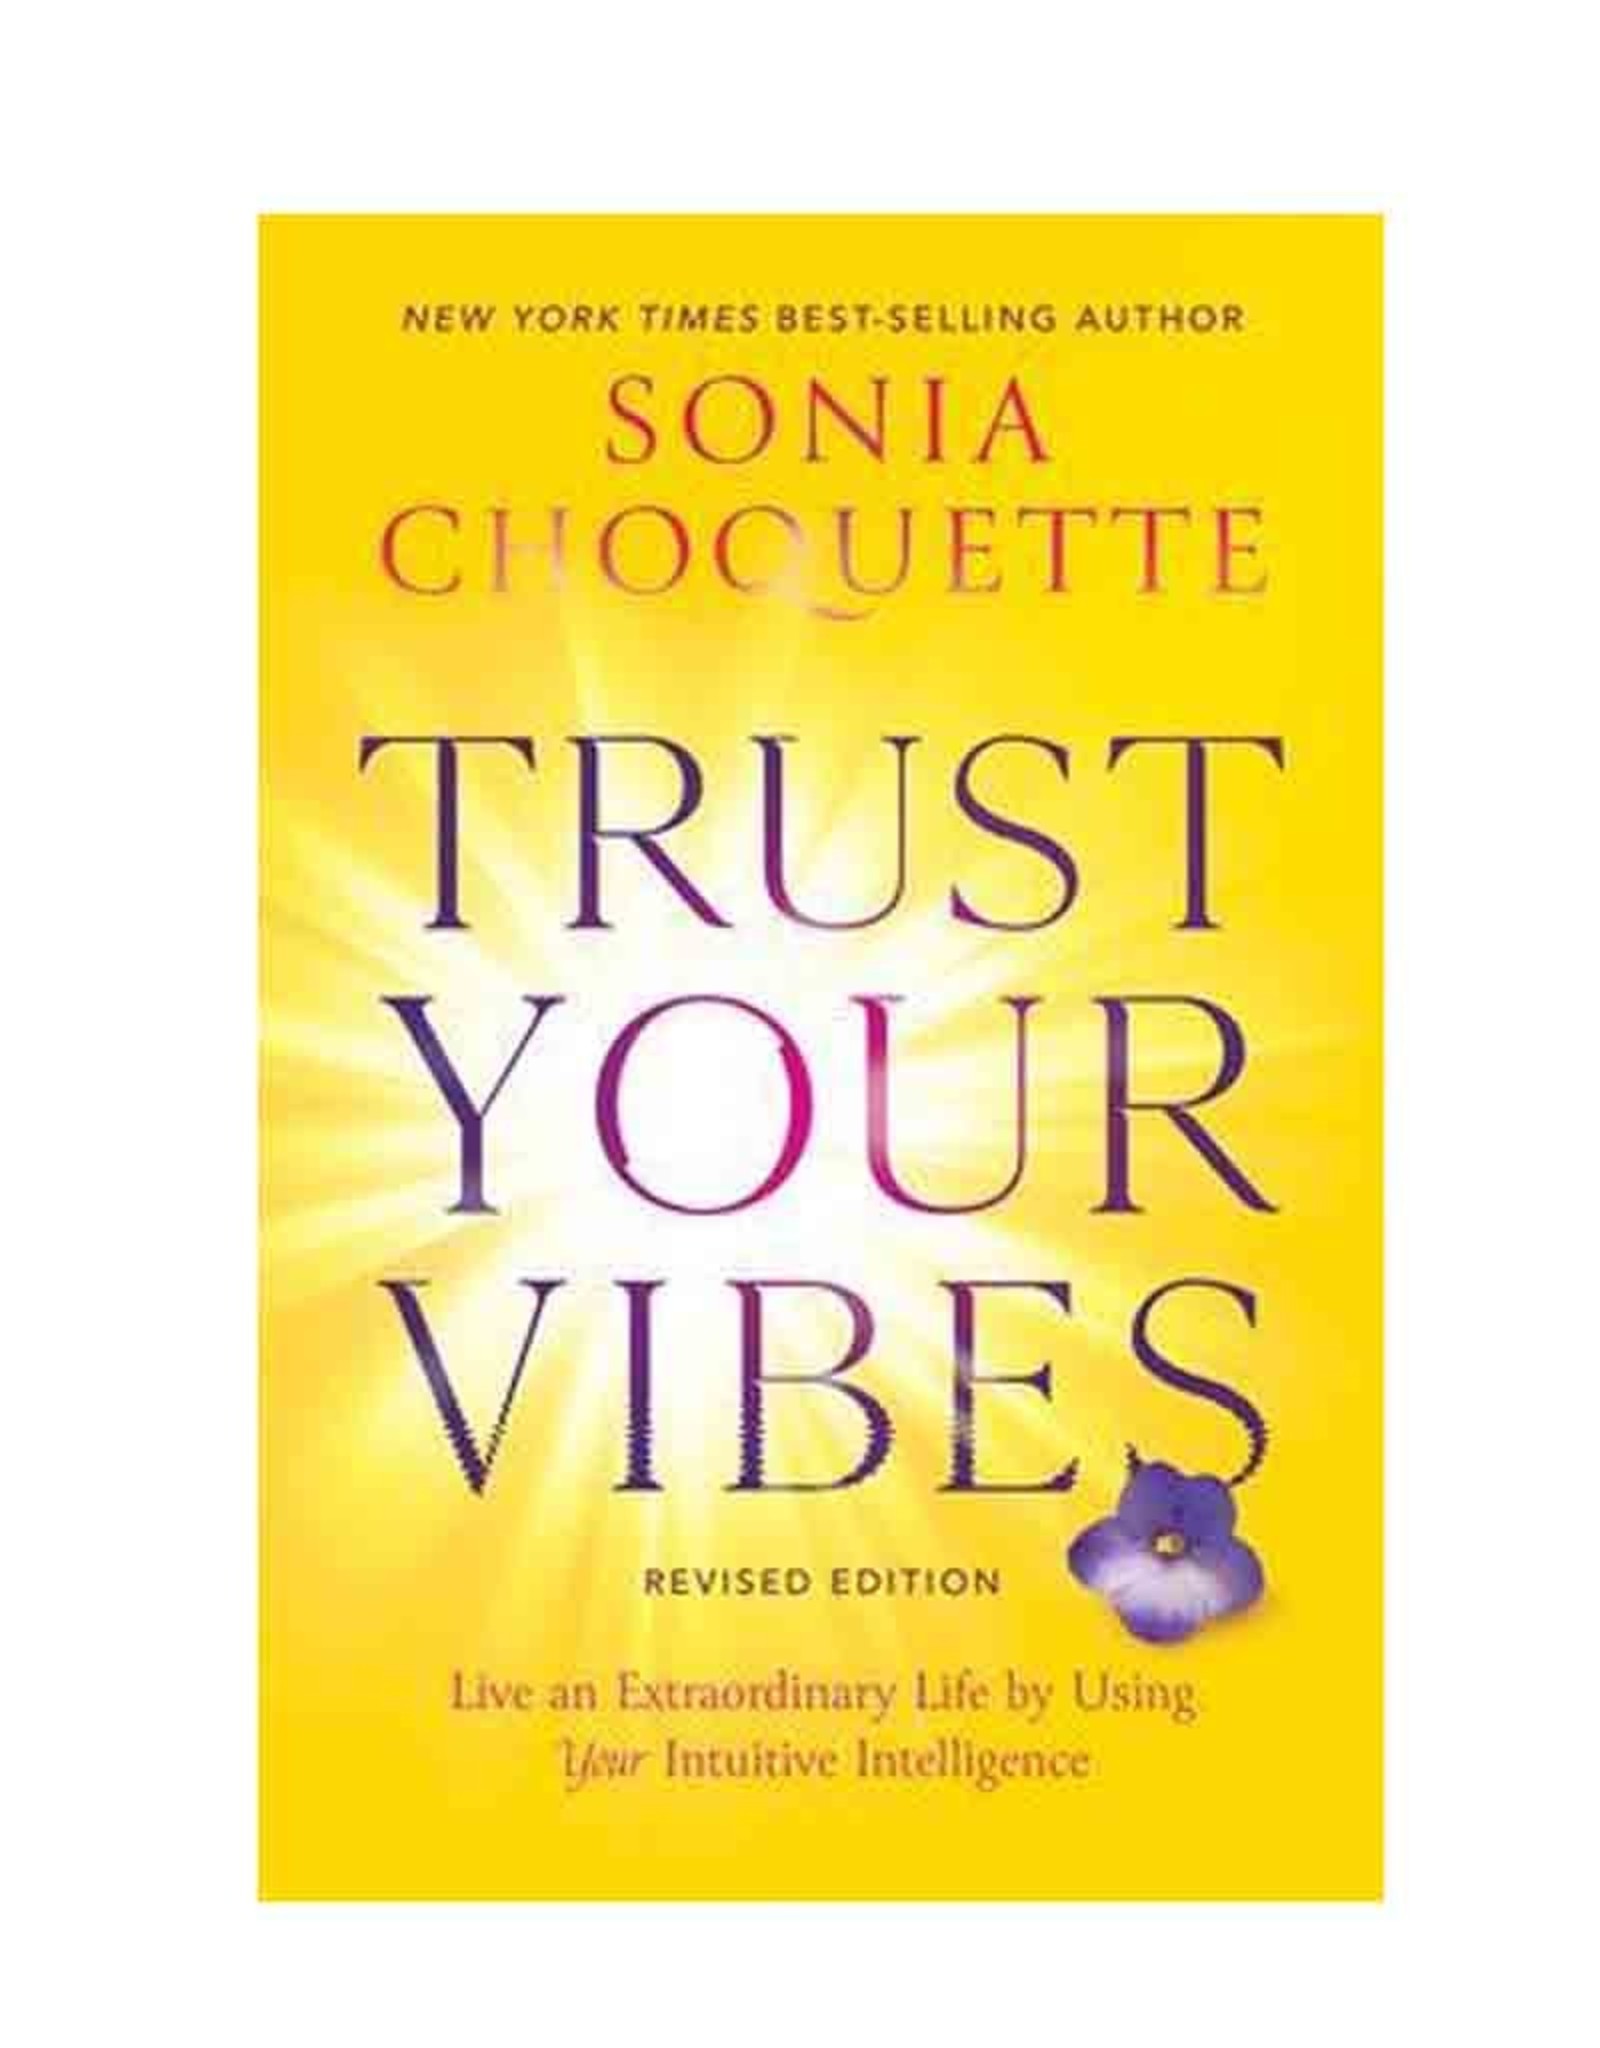 Trust Your Vibes Revised Edition by Sonia Choquette